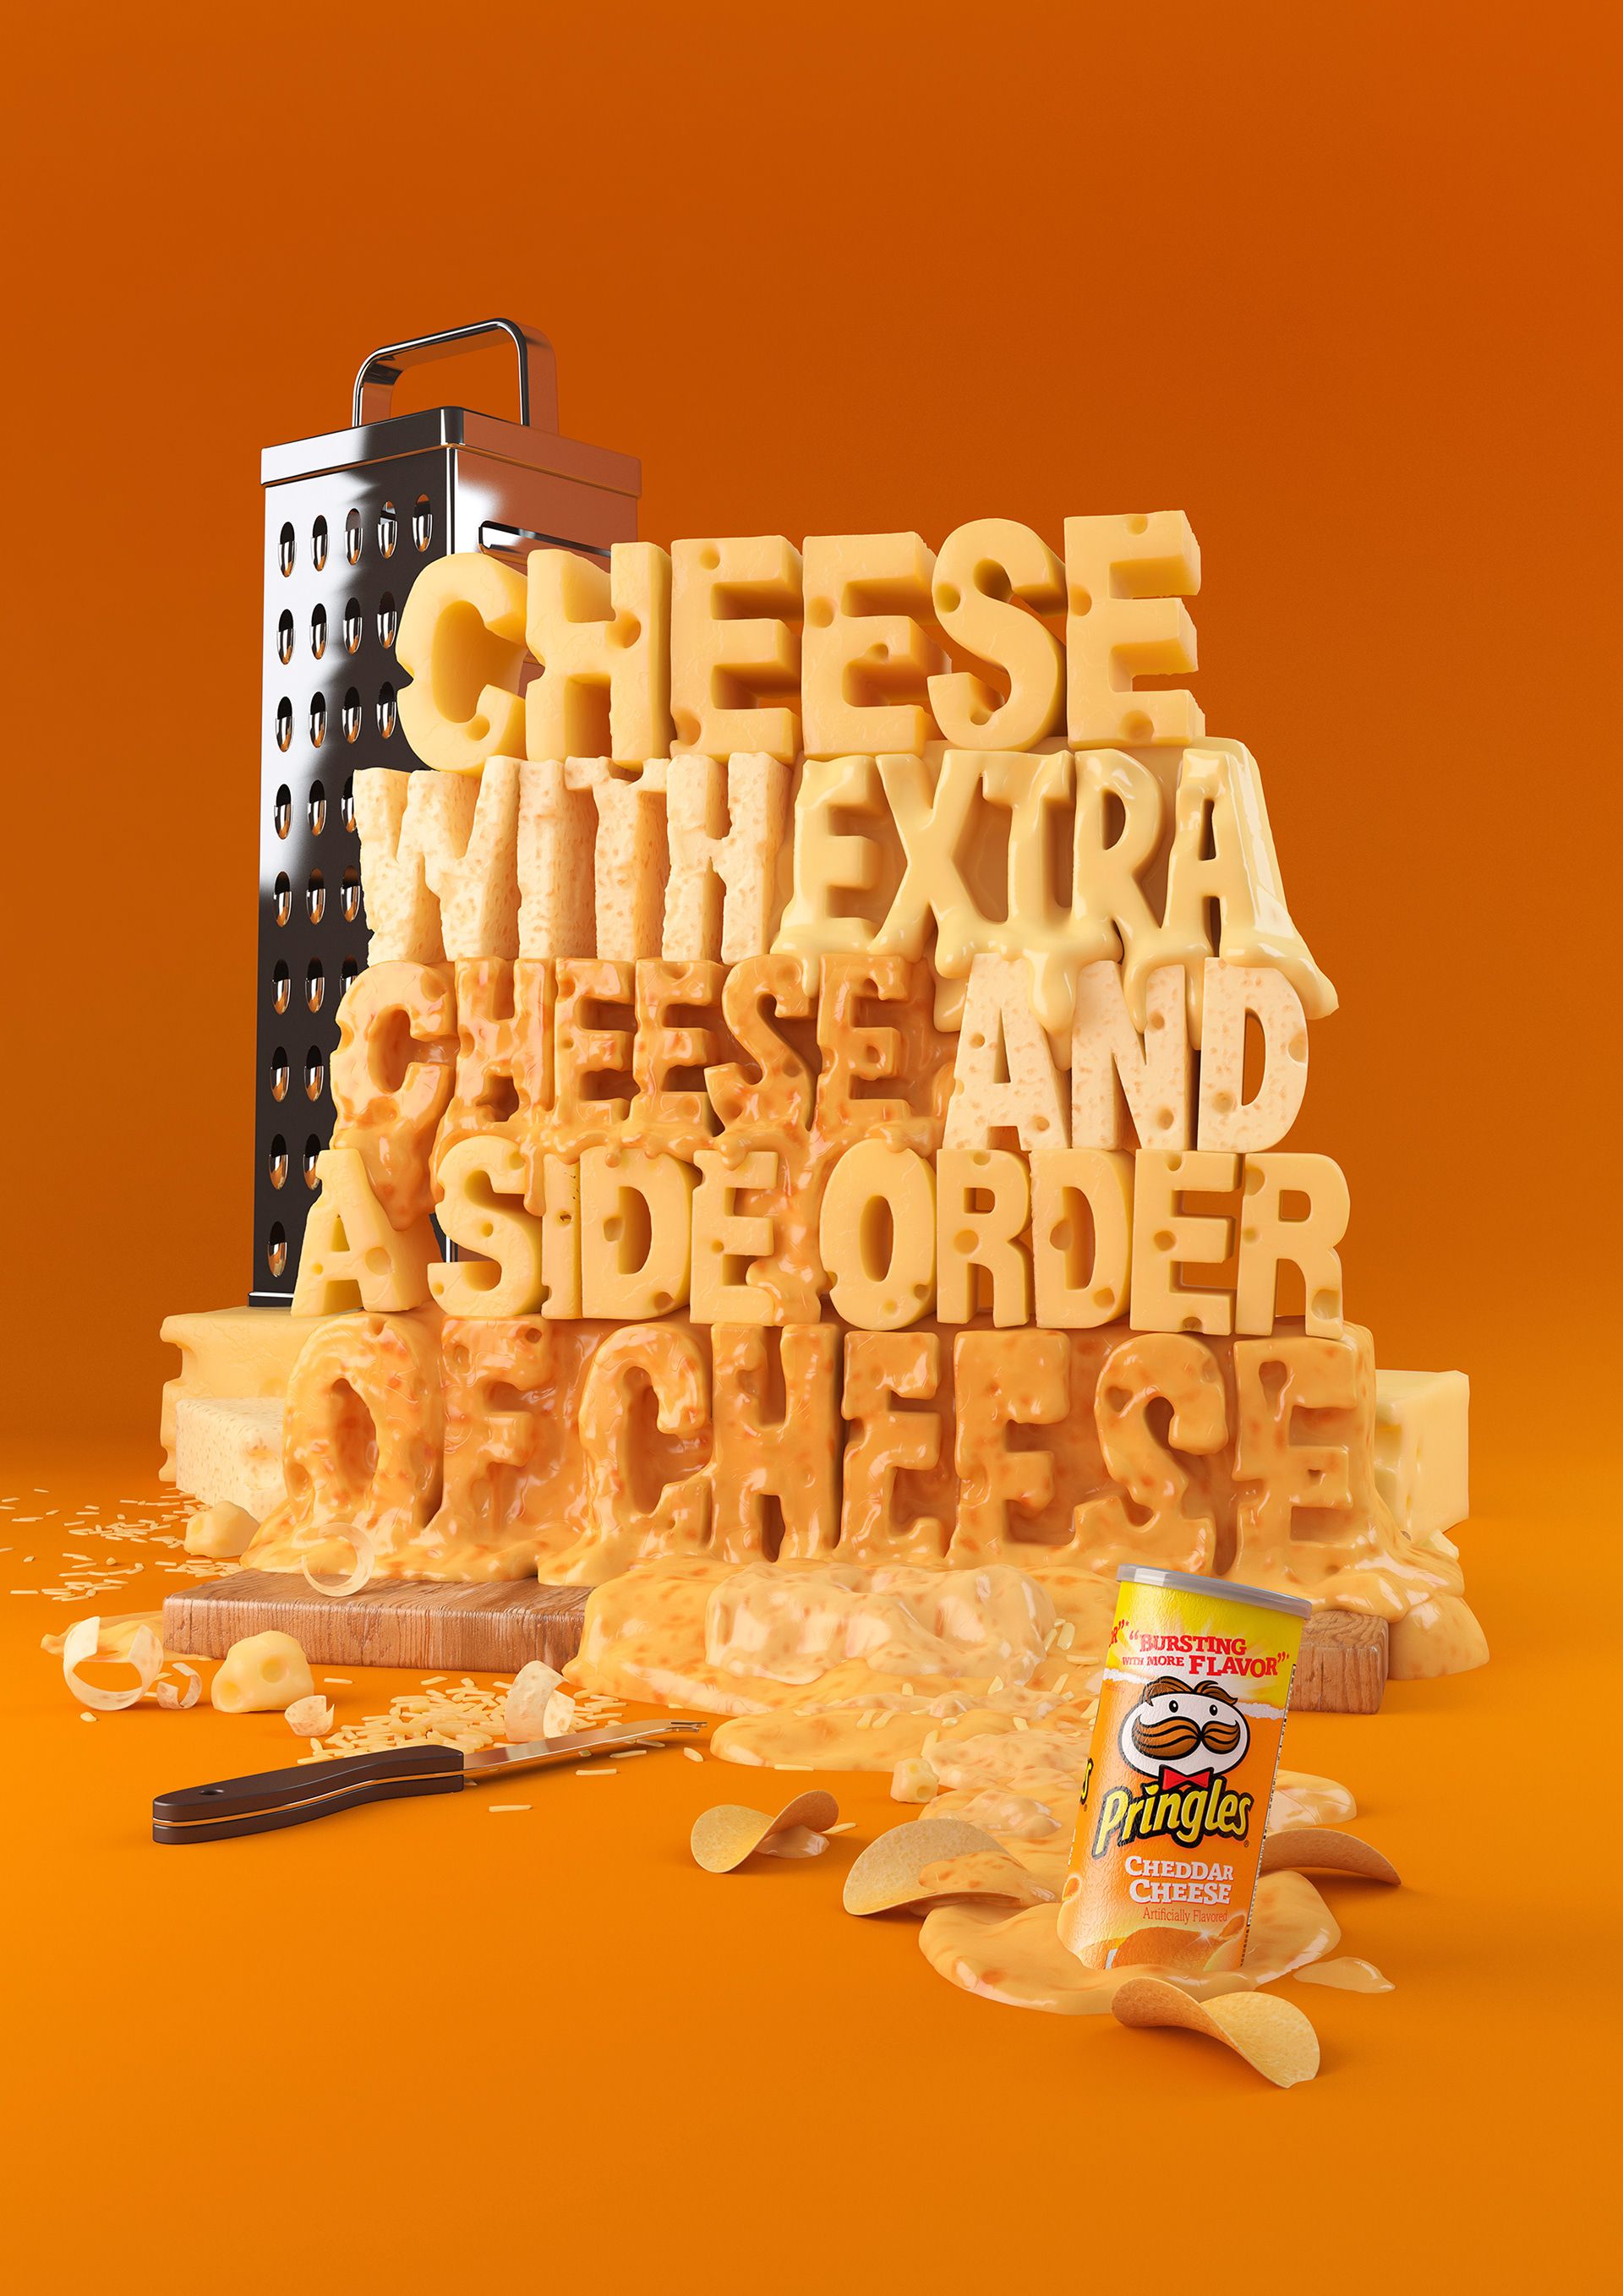 Pringles ad with cheese